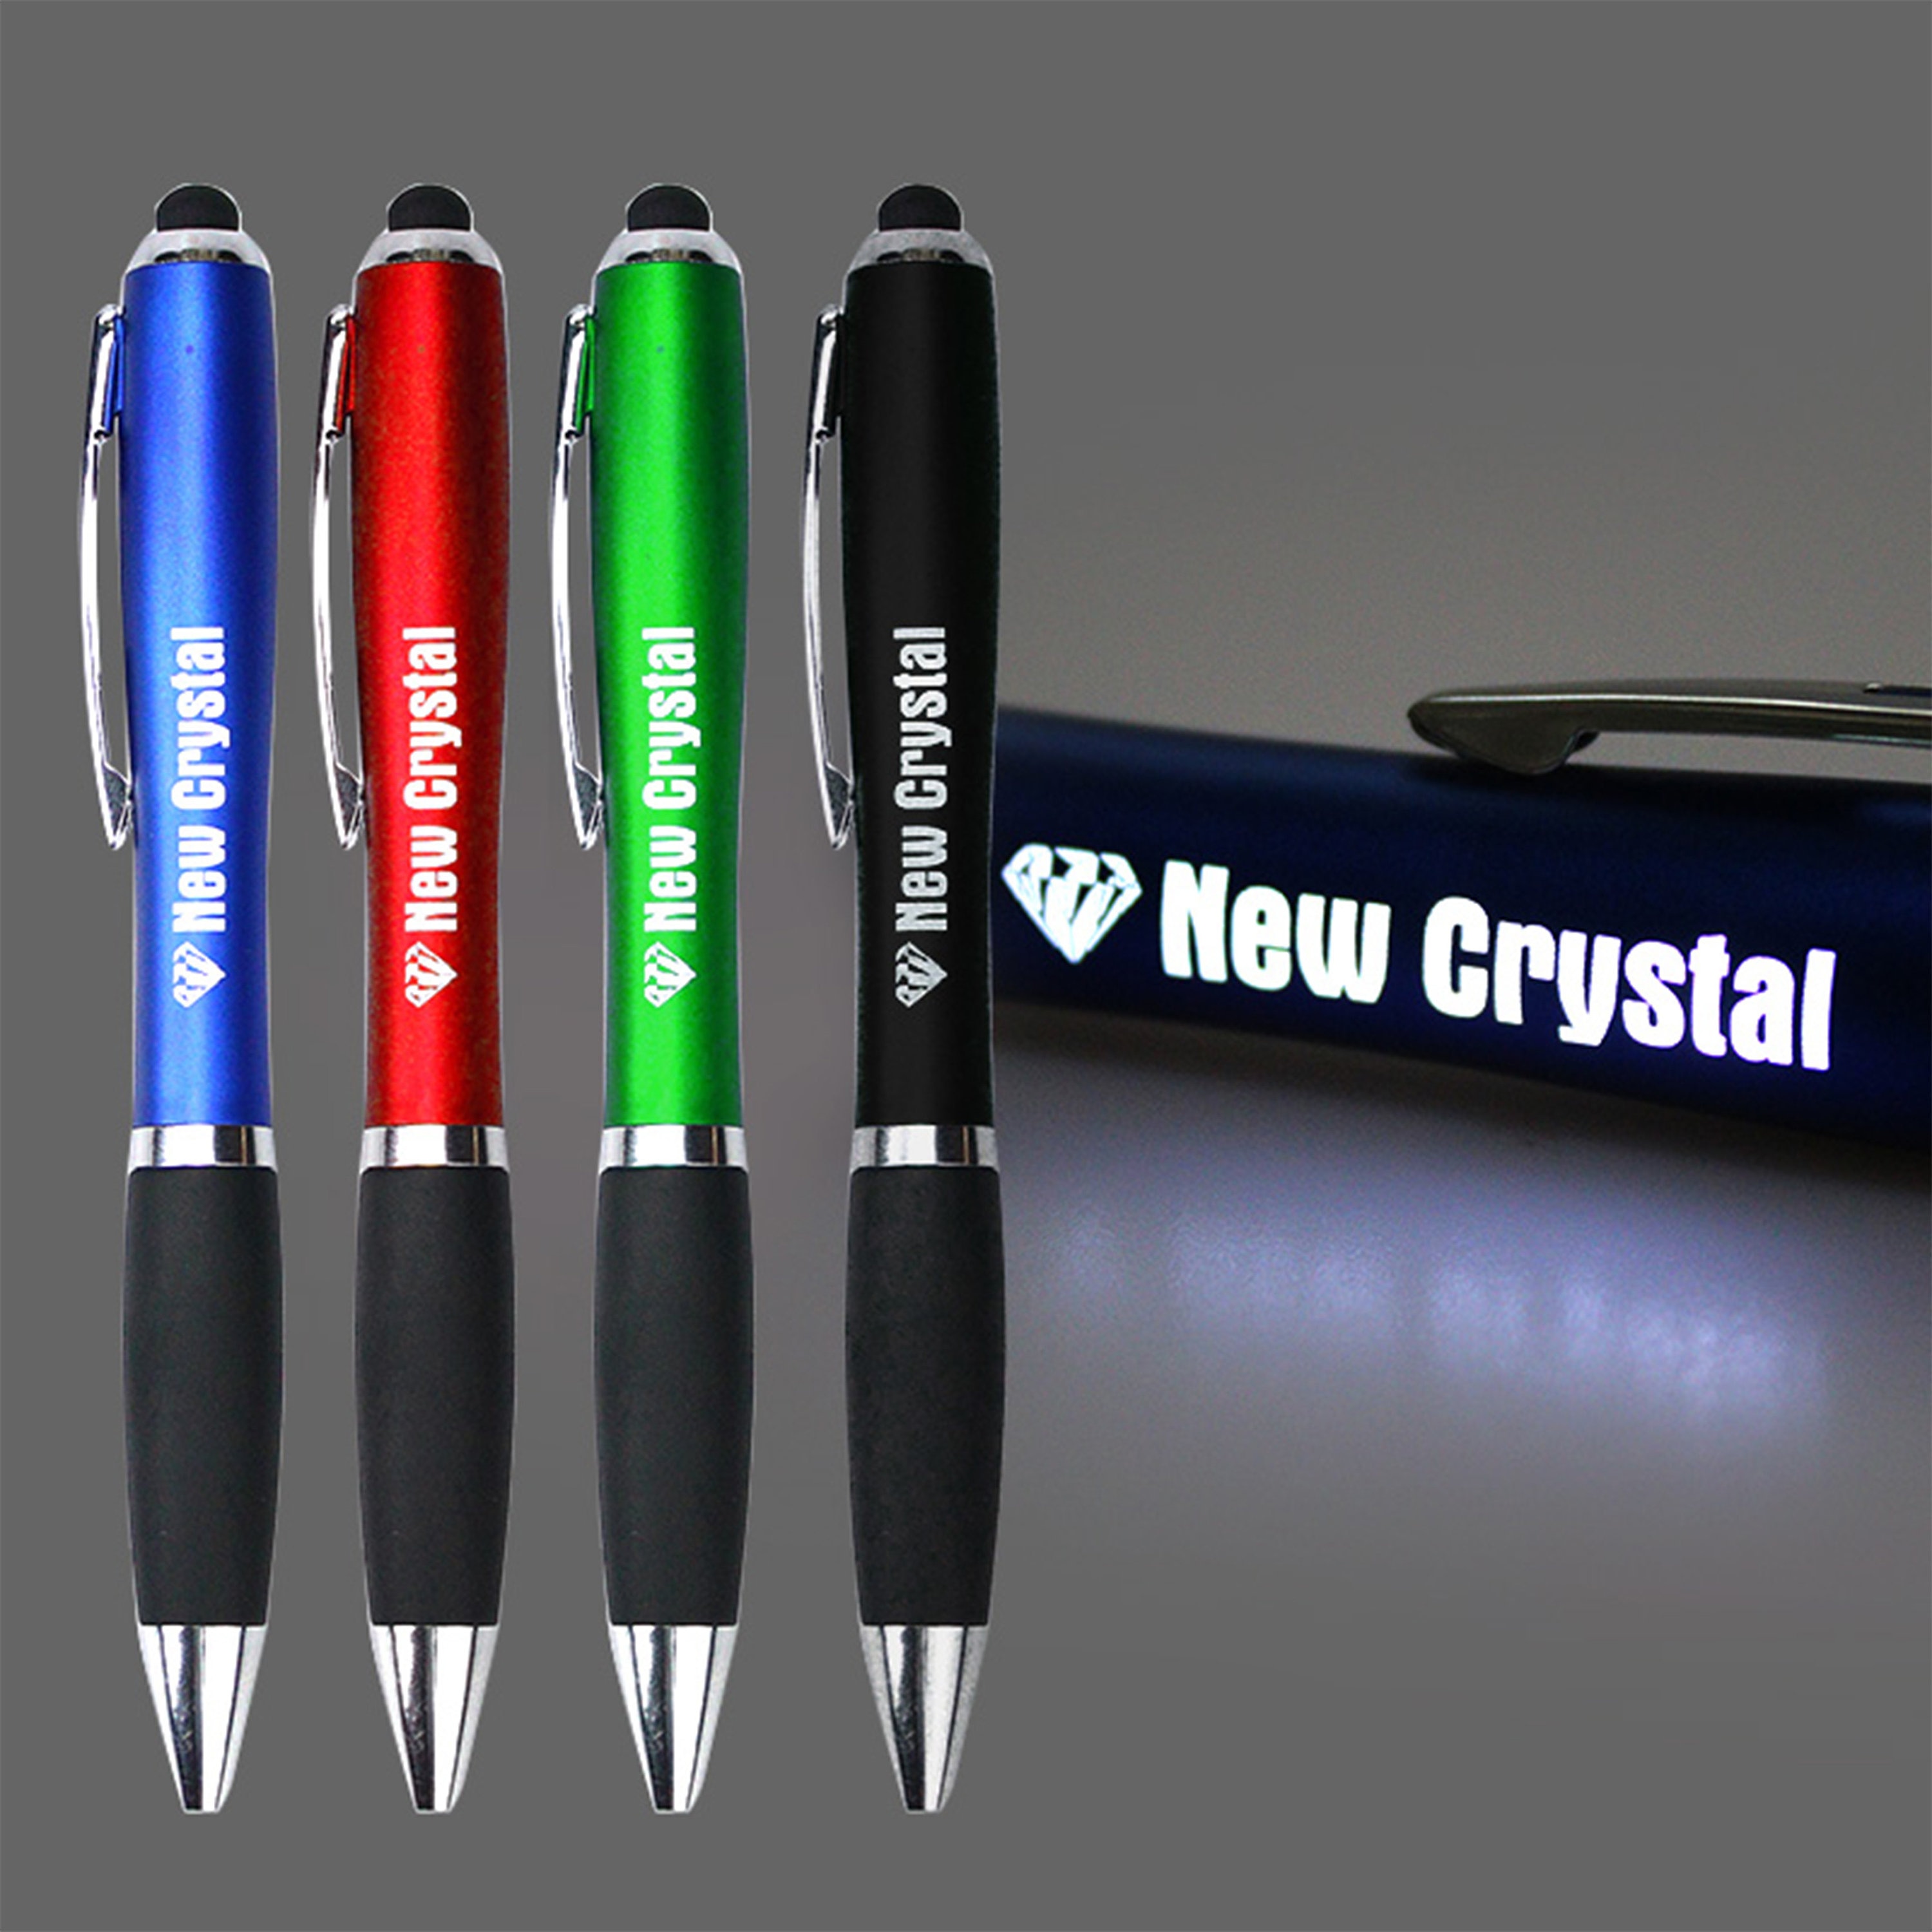 Stylo Publicitaire 3 Couleurs Avec Stylet 'Mayall